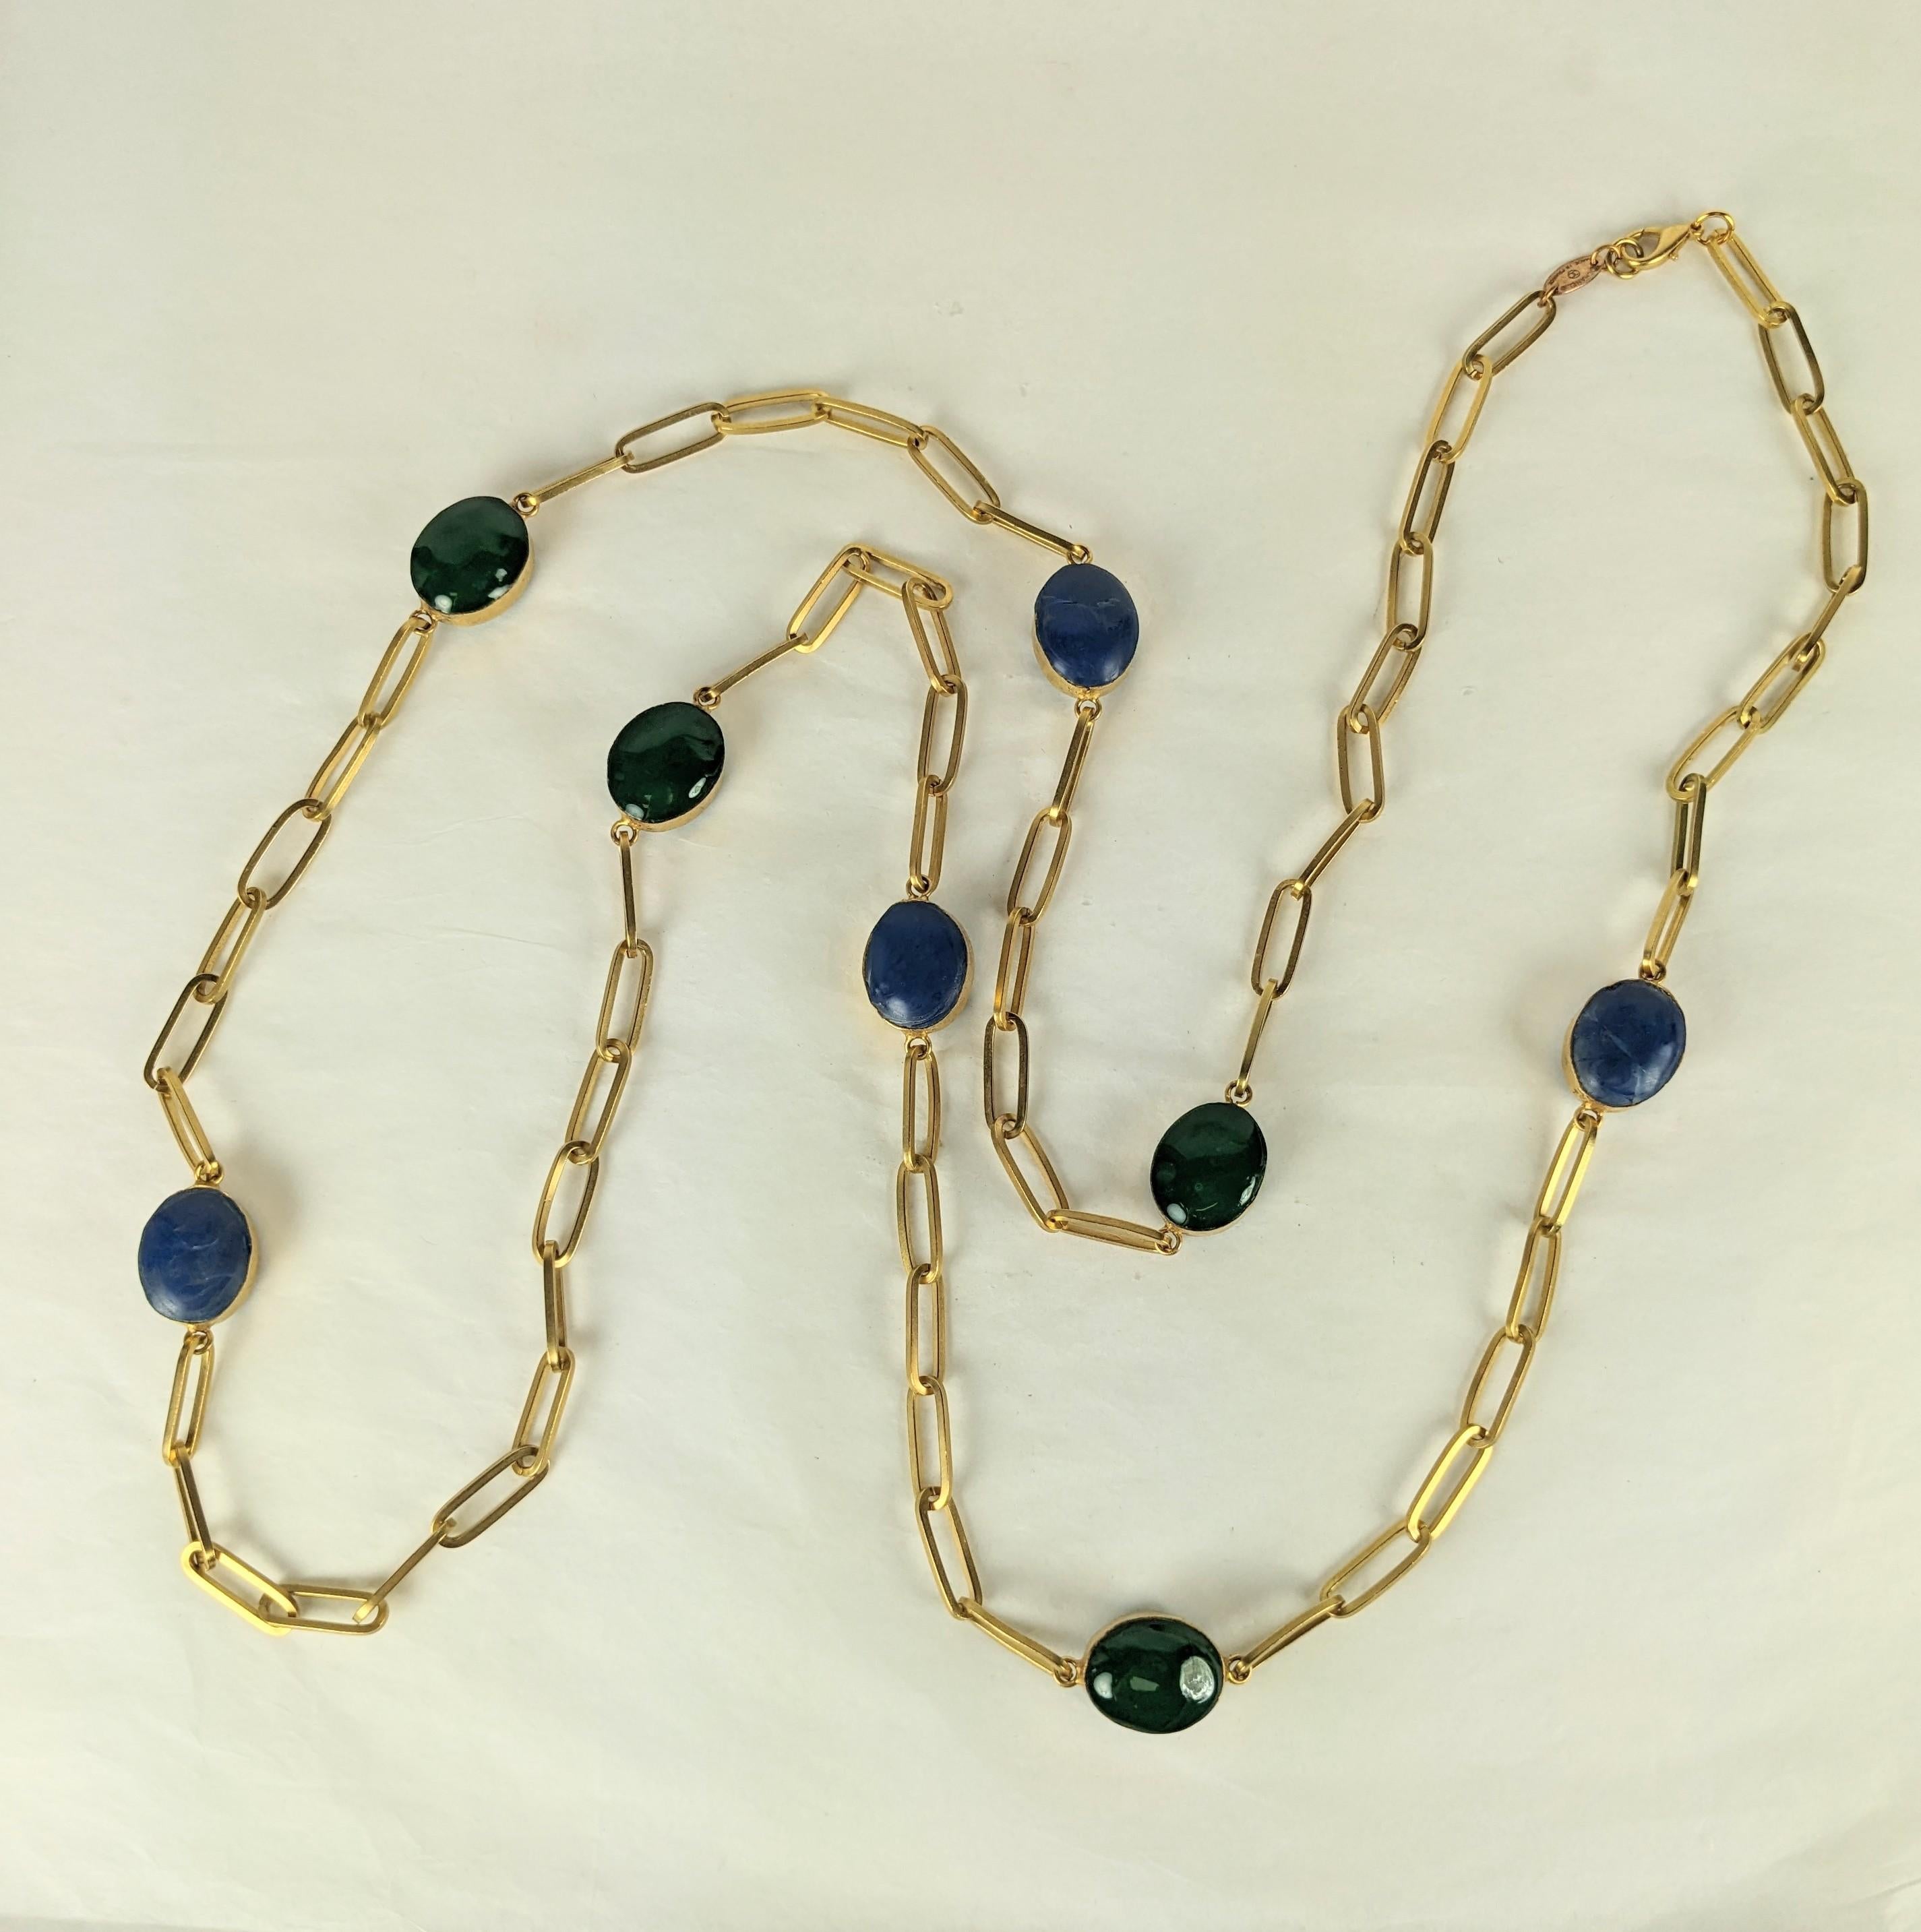 Unusual Karl Lagerfeld for Chanel Maison Gripoix sautoir necklace. Of gilt bronze modernist paper clip shape links in a rich green gold plate. Alternating deeply set bronze ovals of thick handmade Gripoix glass cabochons, of faux emerald and lapis